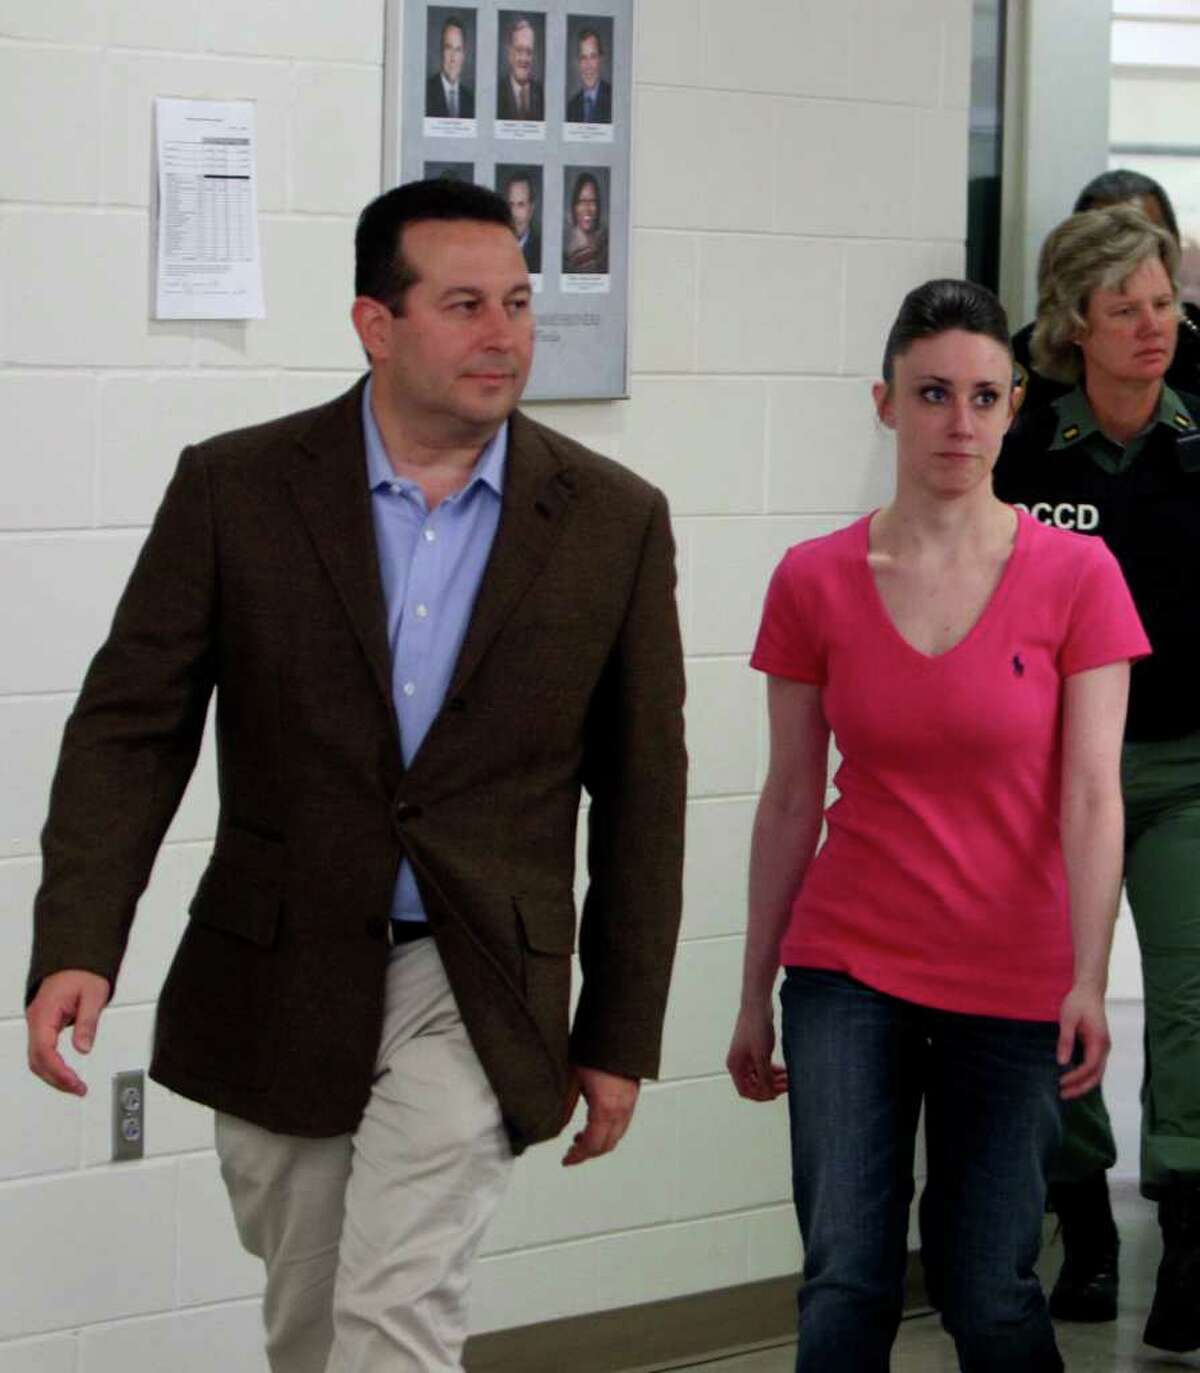 Casey Anthony, front right, walks out of the Orange County Jail with her attorney Jose Baez, left, during her release in Orlando, Fla., early Sunday, July 17, 2011. Anthony was acquitted last week of murder in the death of her daughter, Caylee.